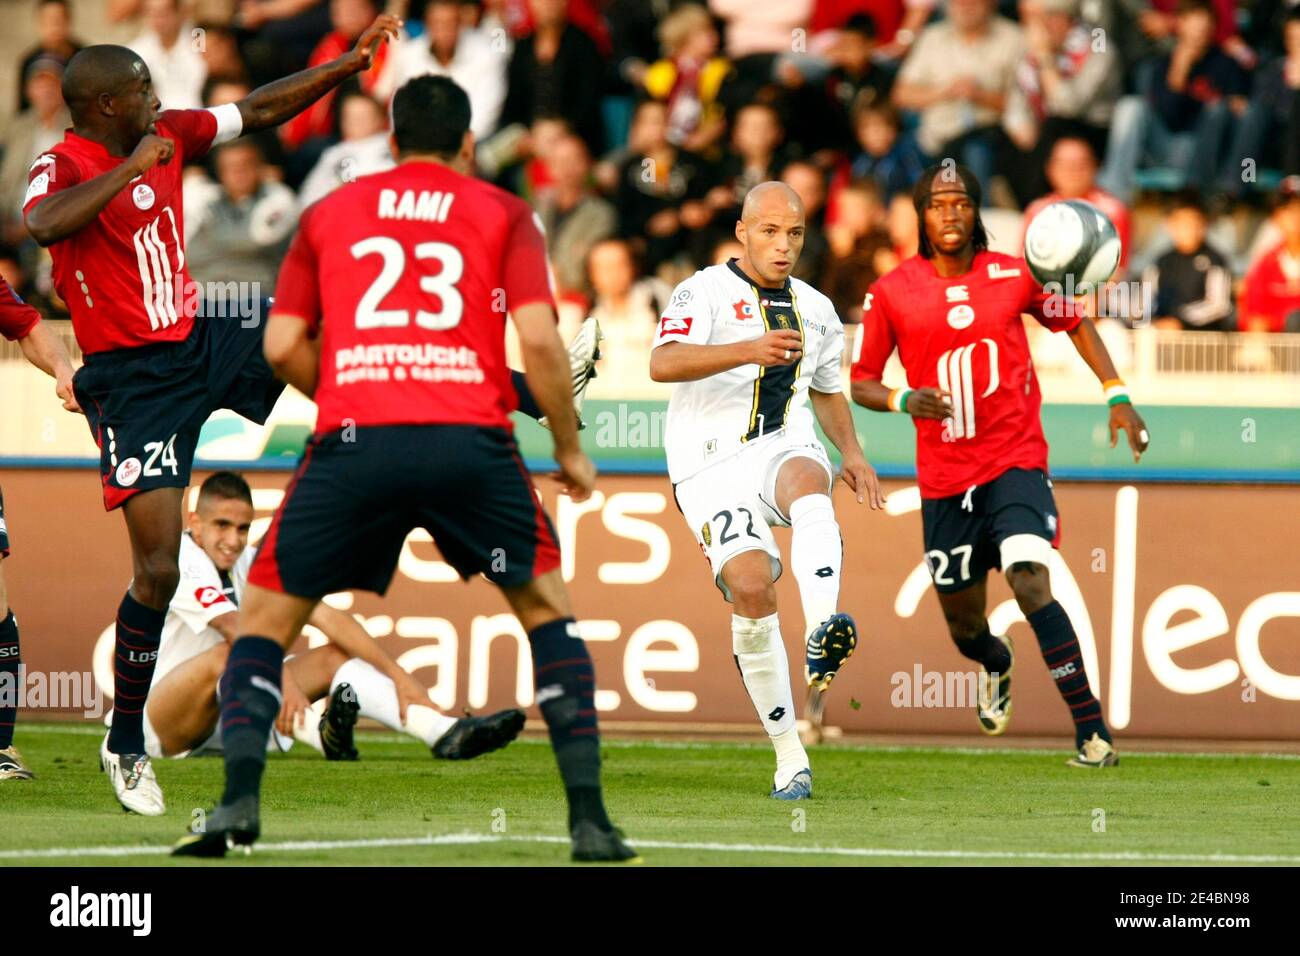 Sochaux's Yassin Mikari during french 1st League soccer match between Lille and Sochaux at Lille Metropole Stadium, in Villeneuve d'Ascq, near Lille, France on September 12, 2009. Lille won 1-0. Photo by Sylvain Lefevre/ABACAPRESS.CO Stock Photo